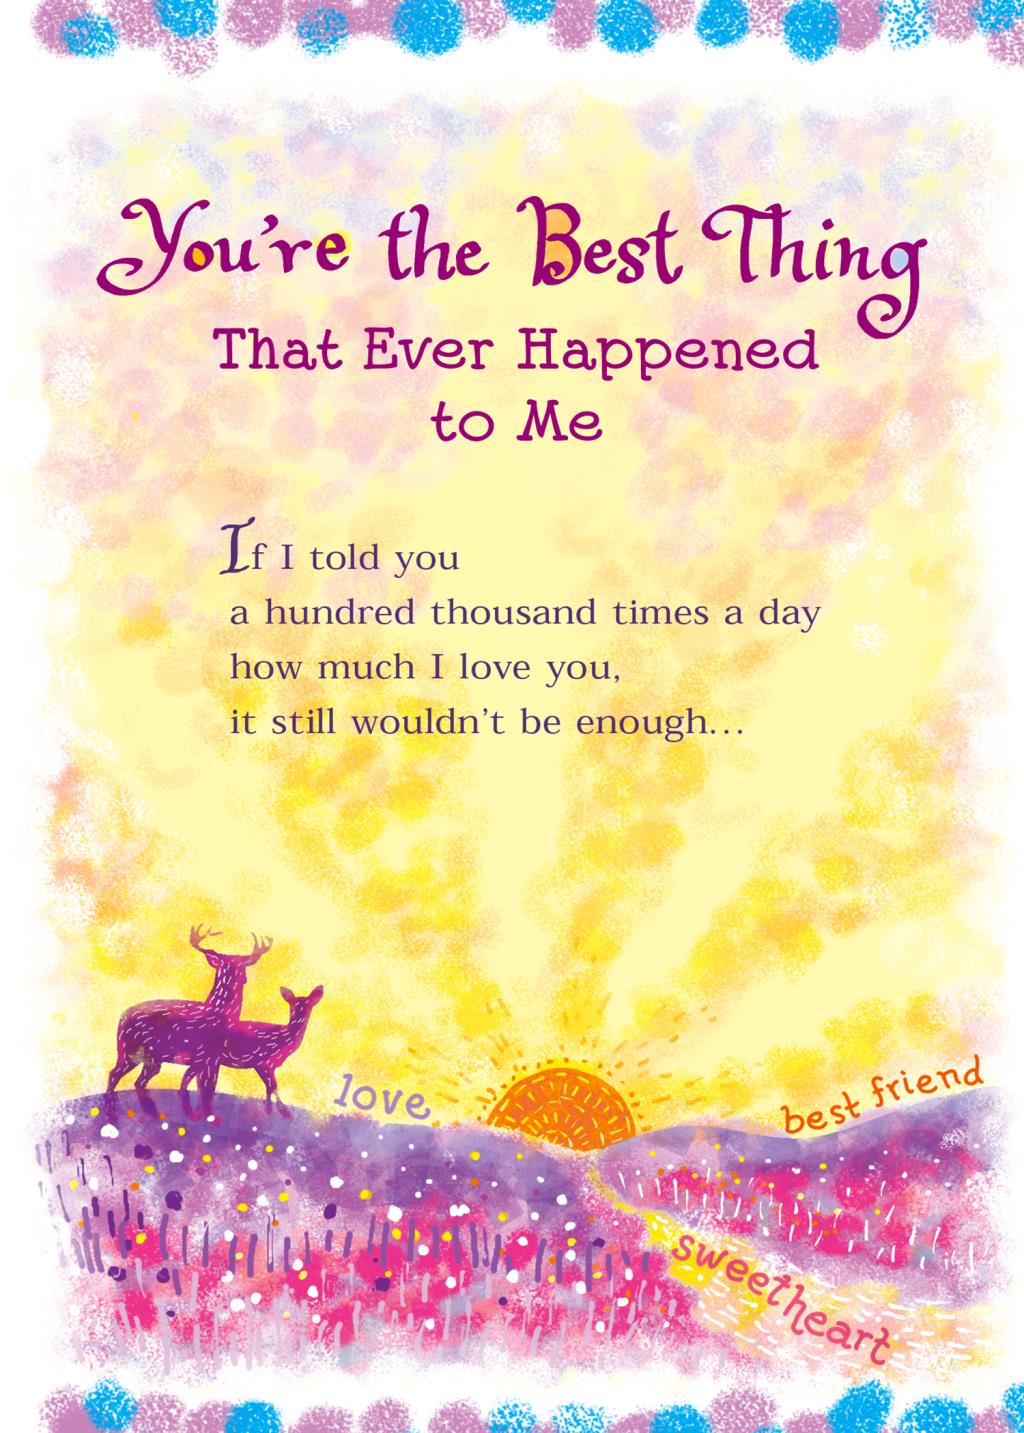 You're The Best Thing Card - Blue Mountain Arts